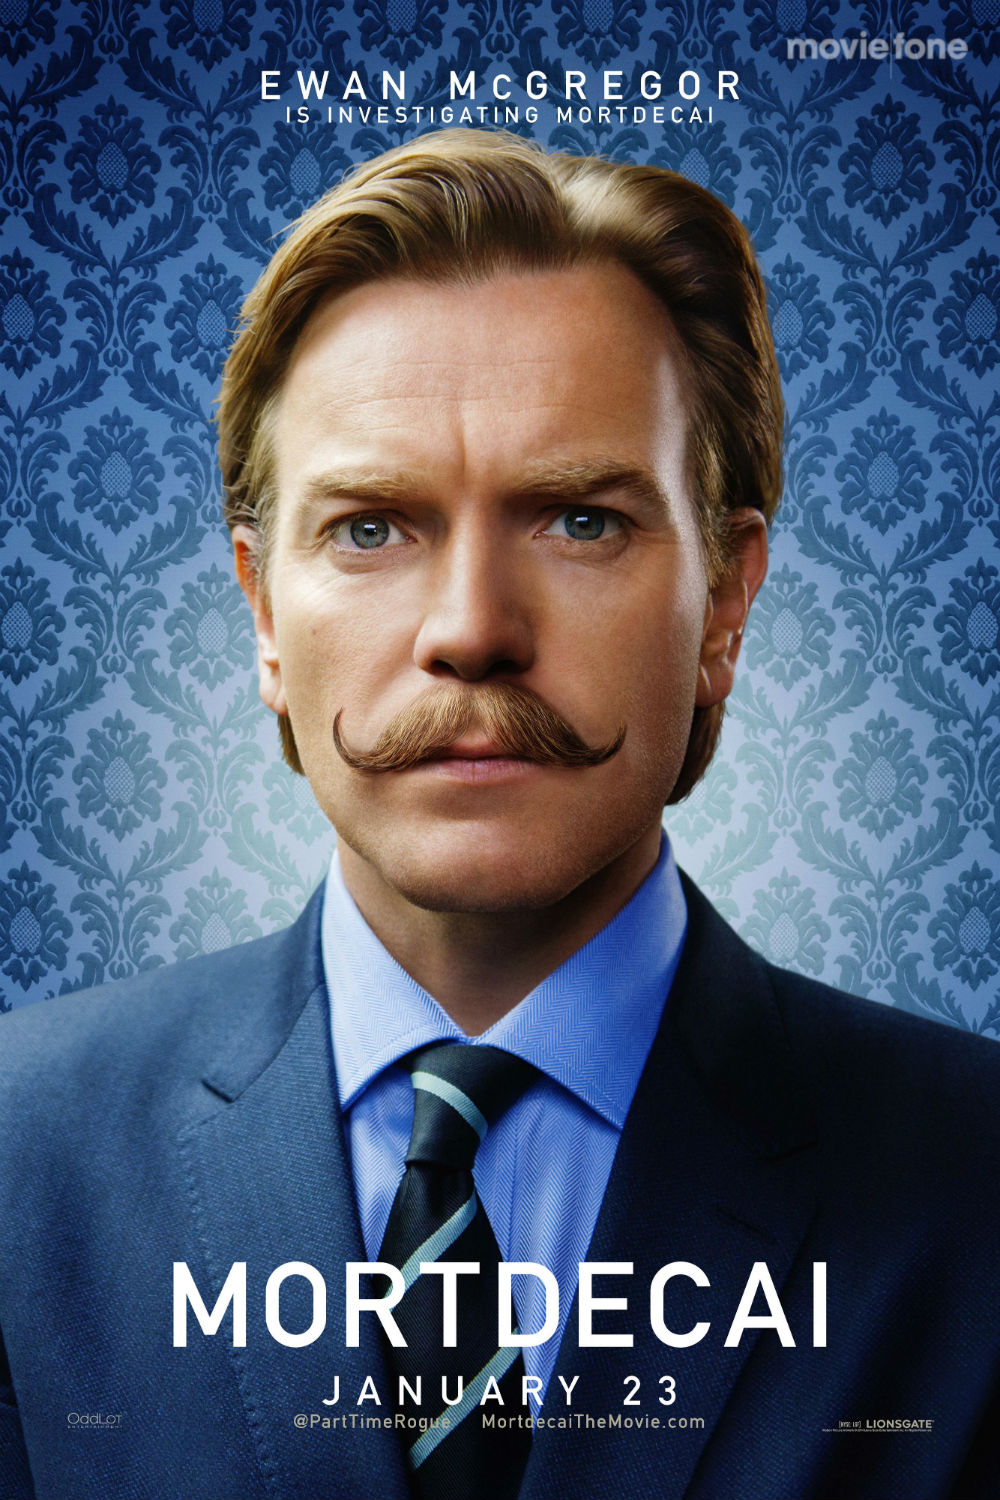 These Four Exclusive Mortdecai Posters Feature Must-See.